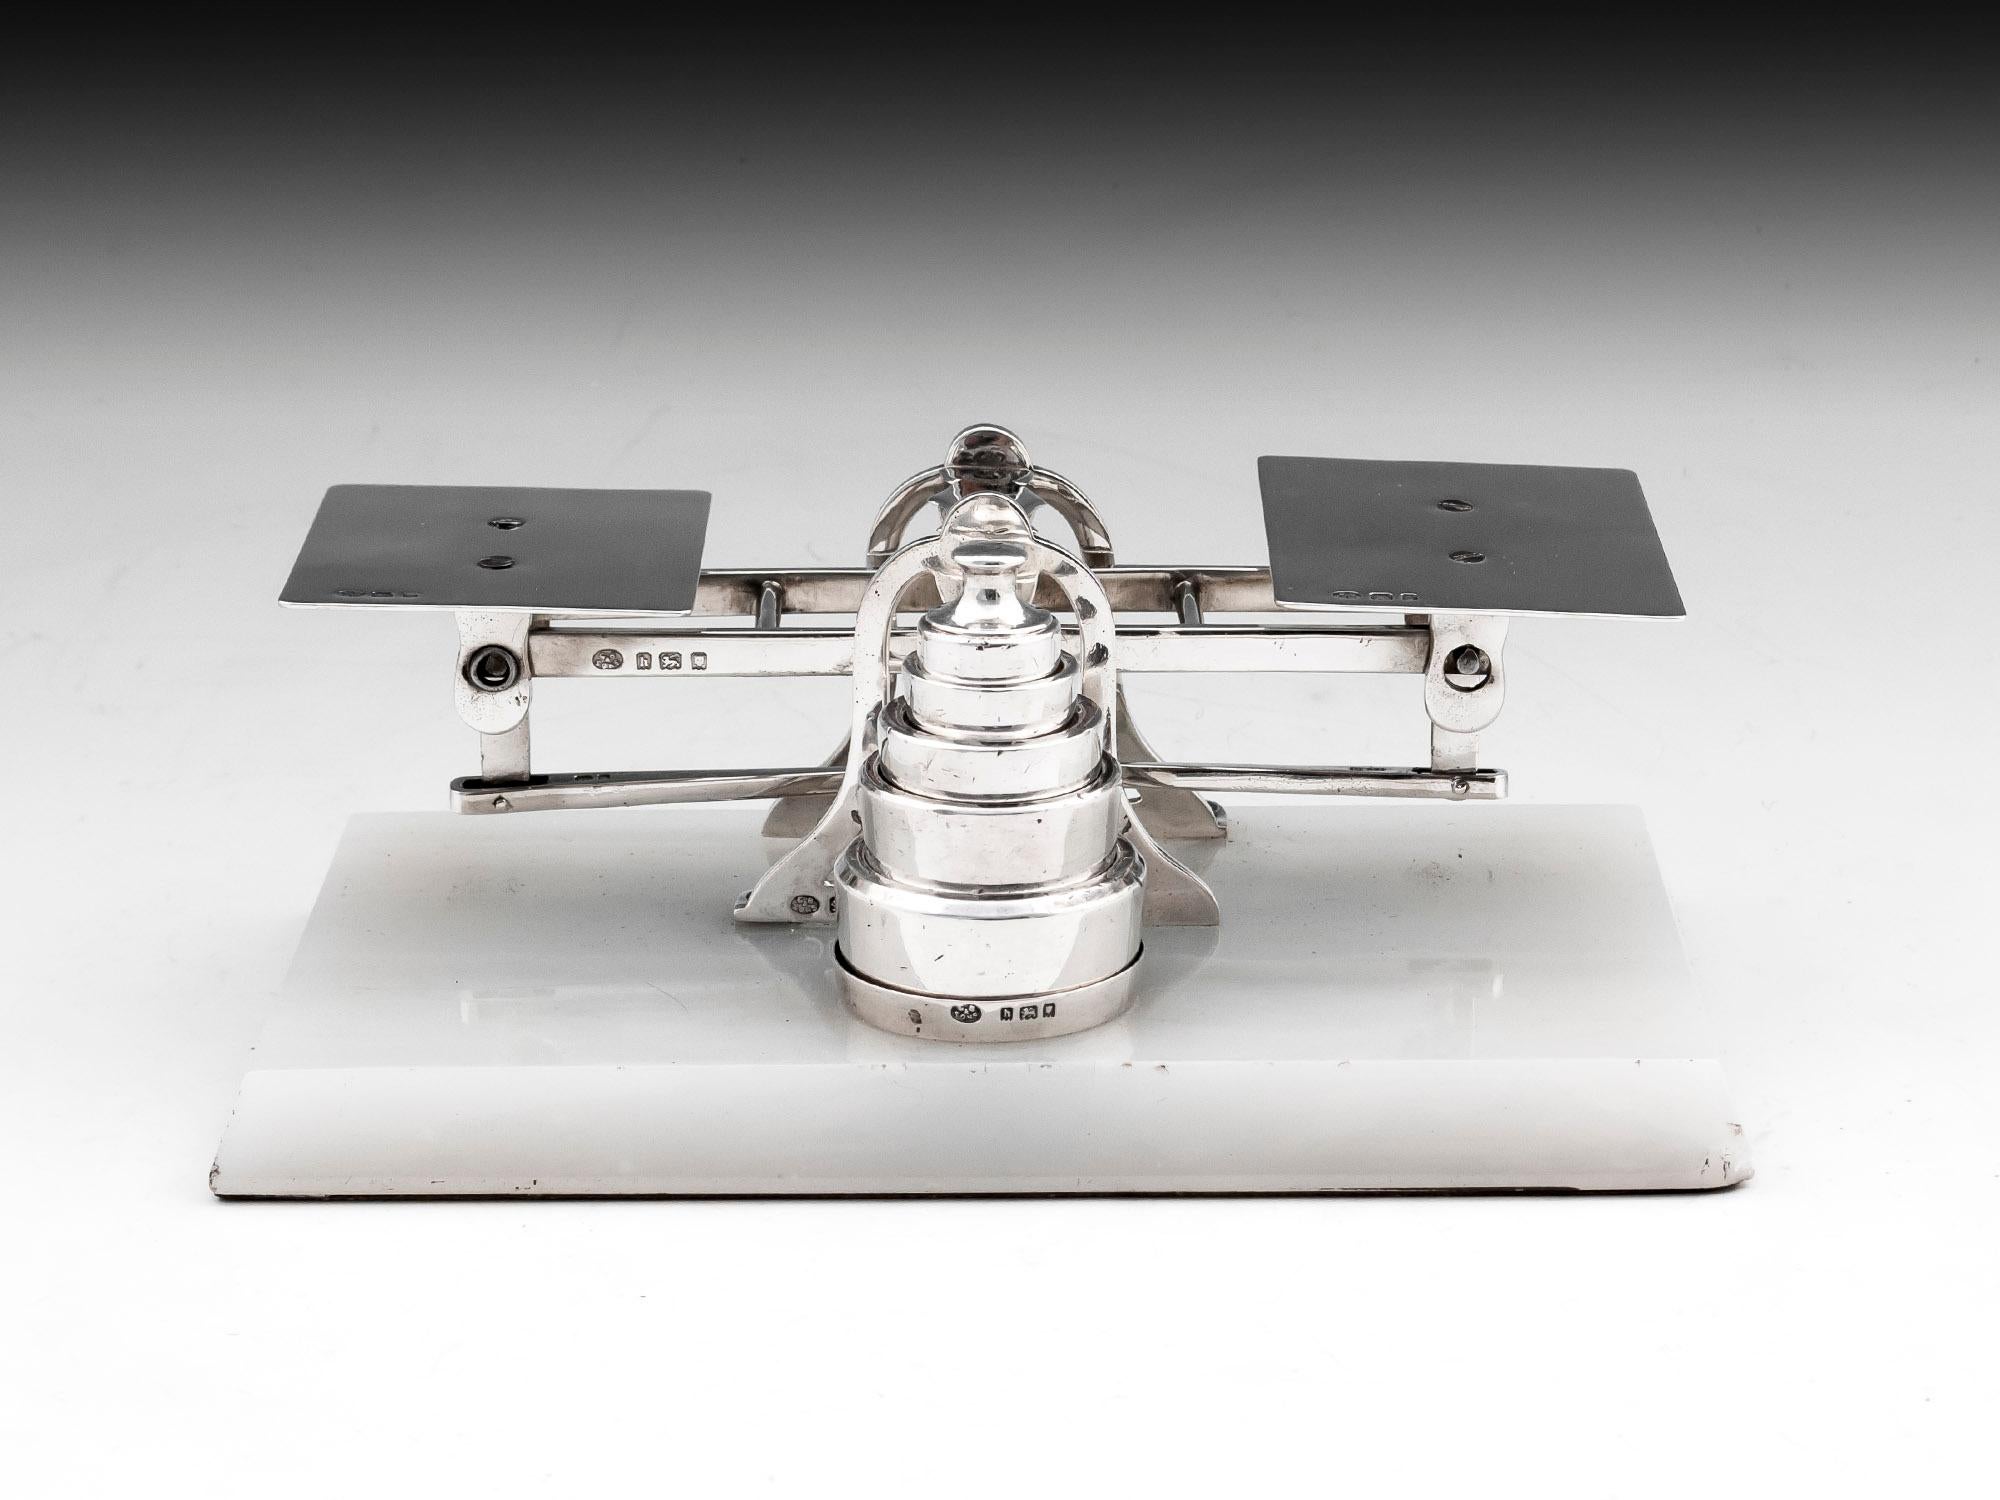 Antique sterling silver postal scales by famous London Silversmith George Betjemann & Sons complete with graduated silver weights. Stands on a solid white onyx base.